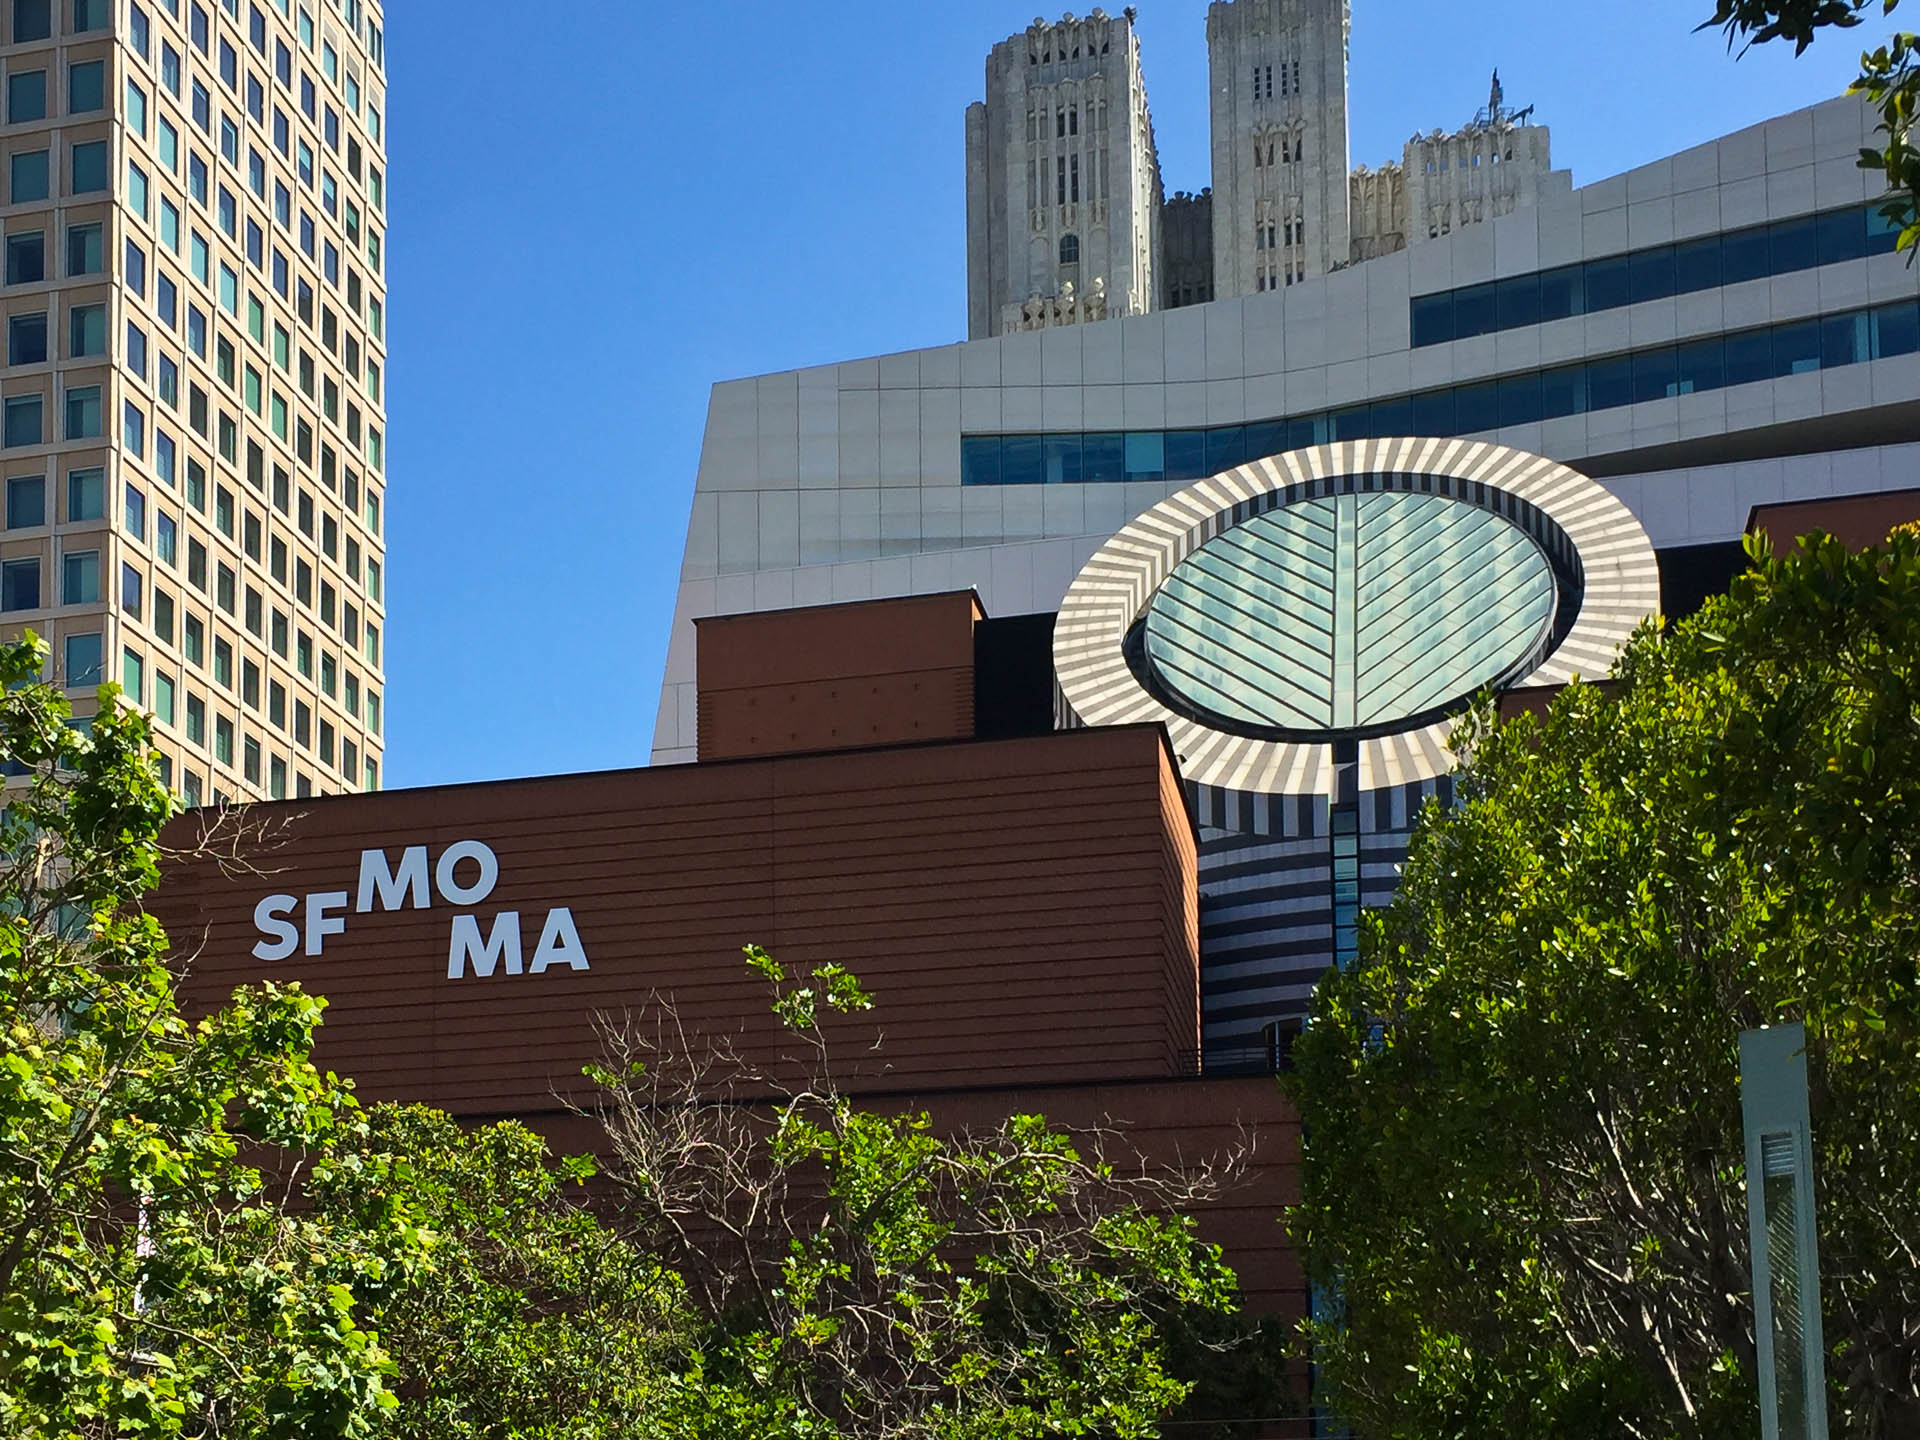 The new reopened SF MOMA, awesome